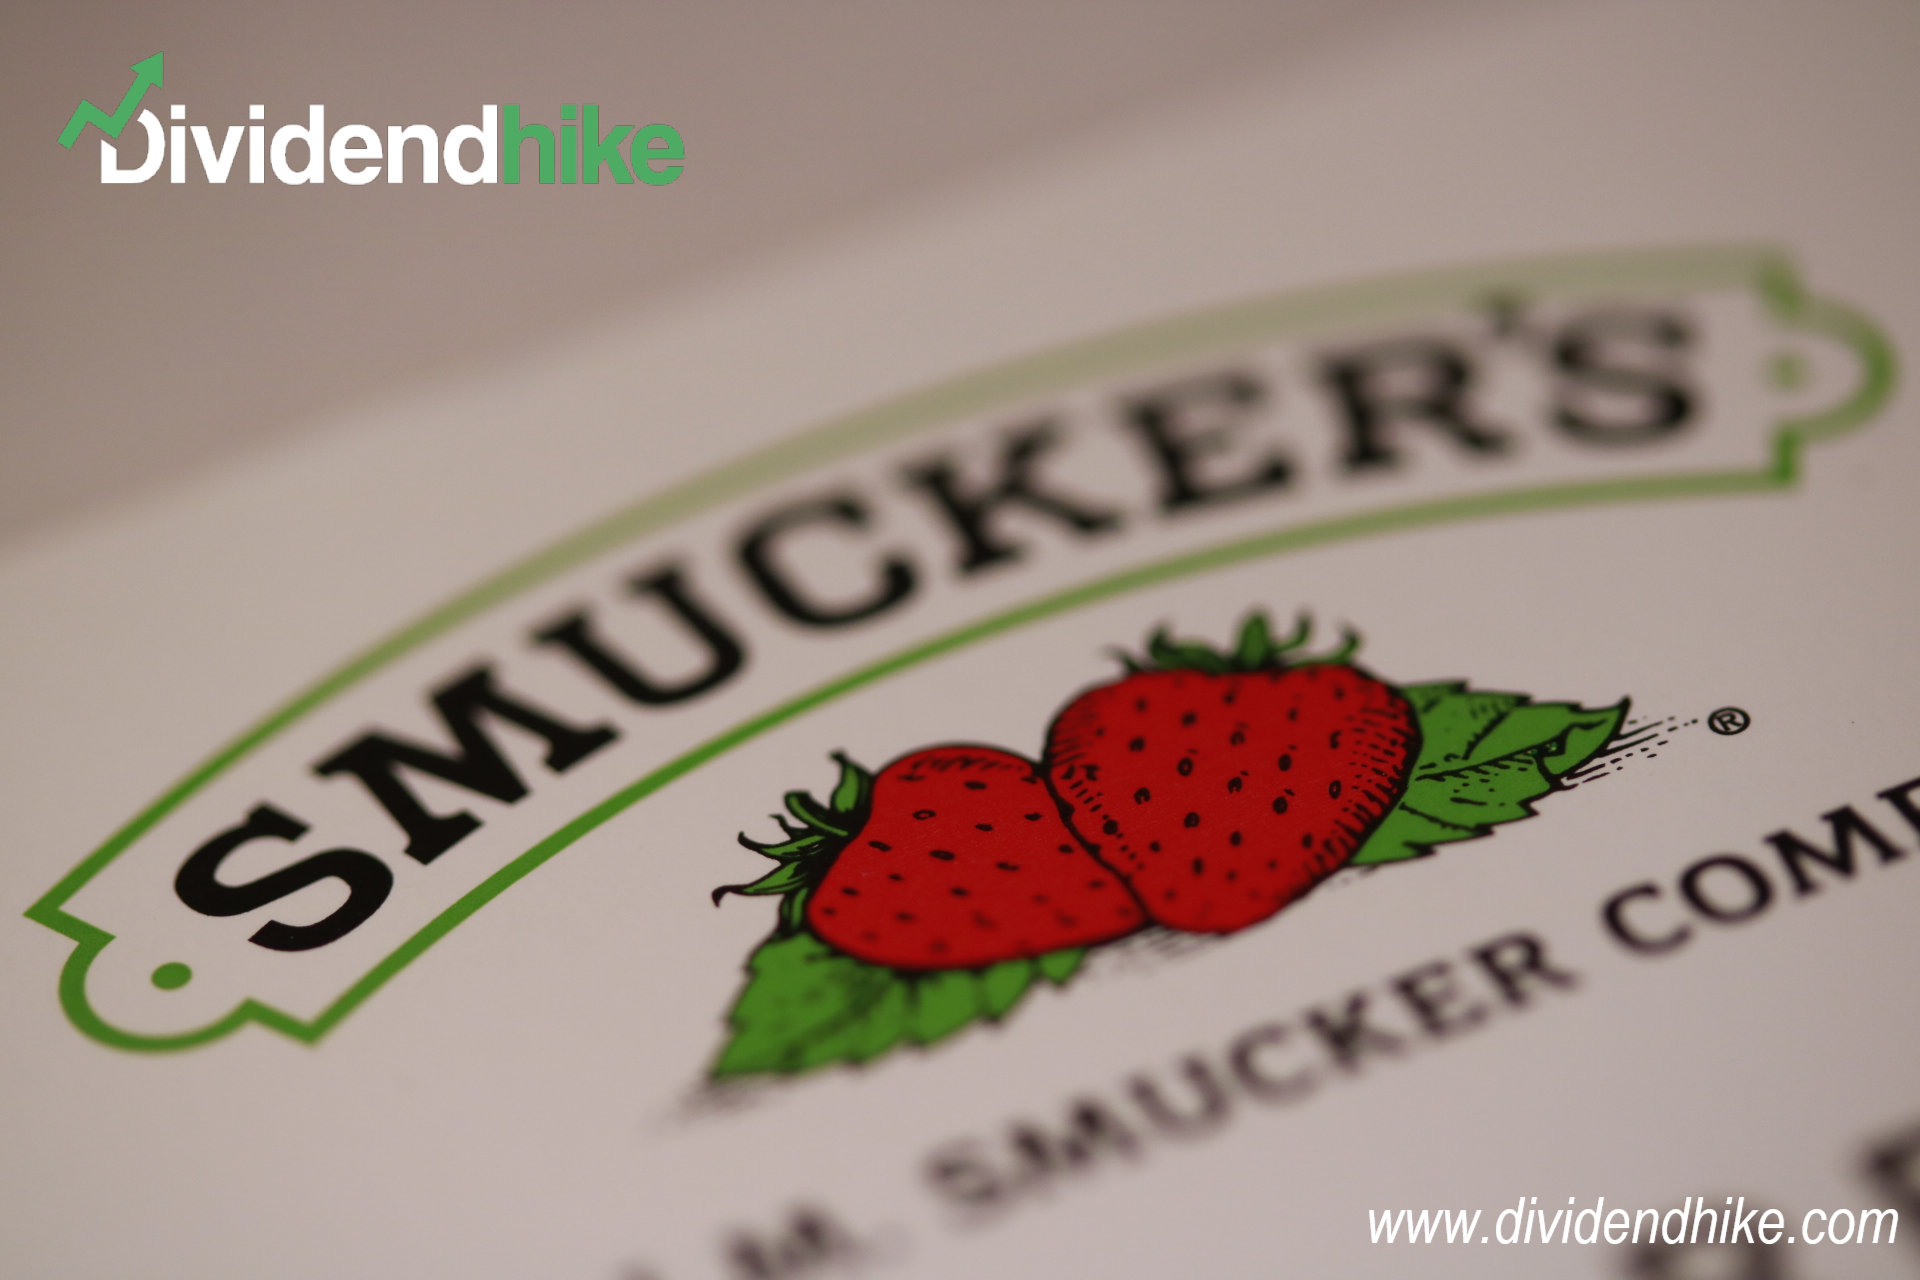 J.M. Smucker hikes dividend by 9%